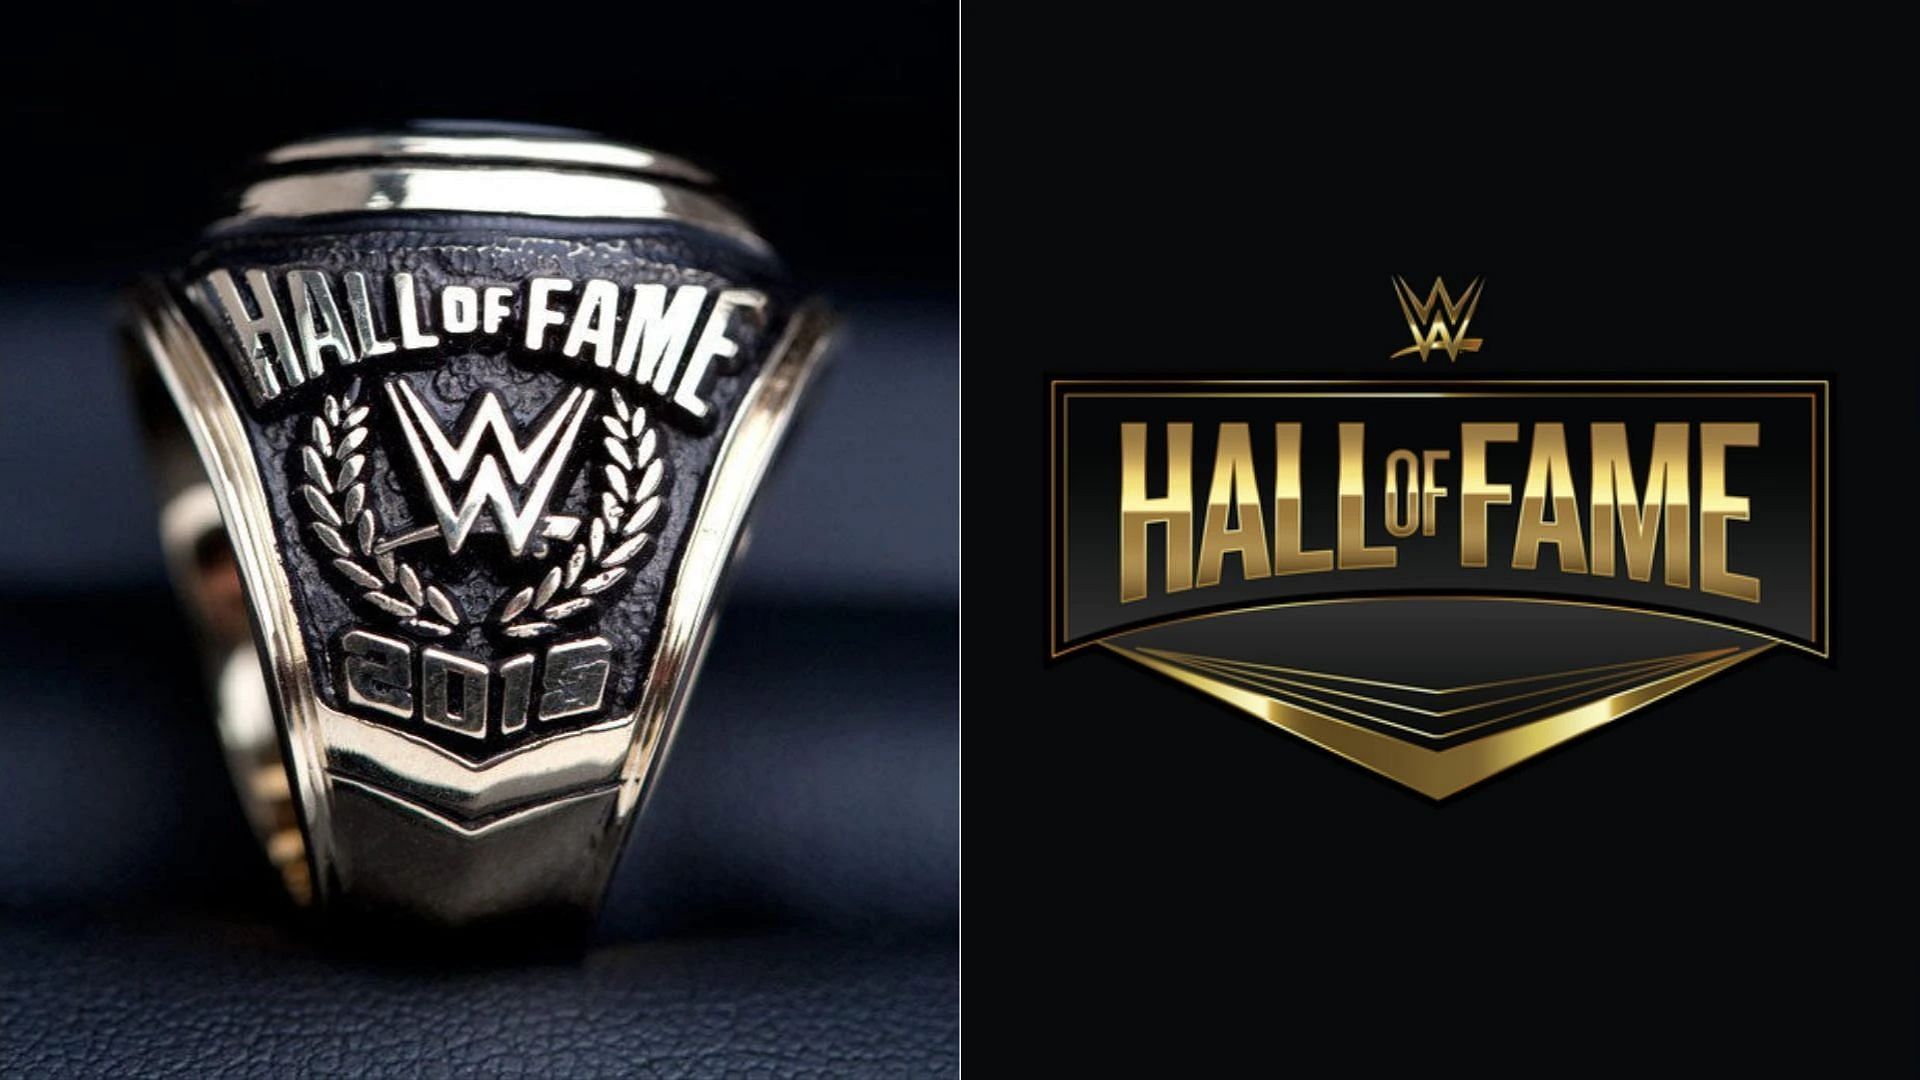 The WWE Hall of Fame will be held on March 31